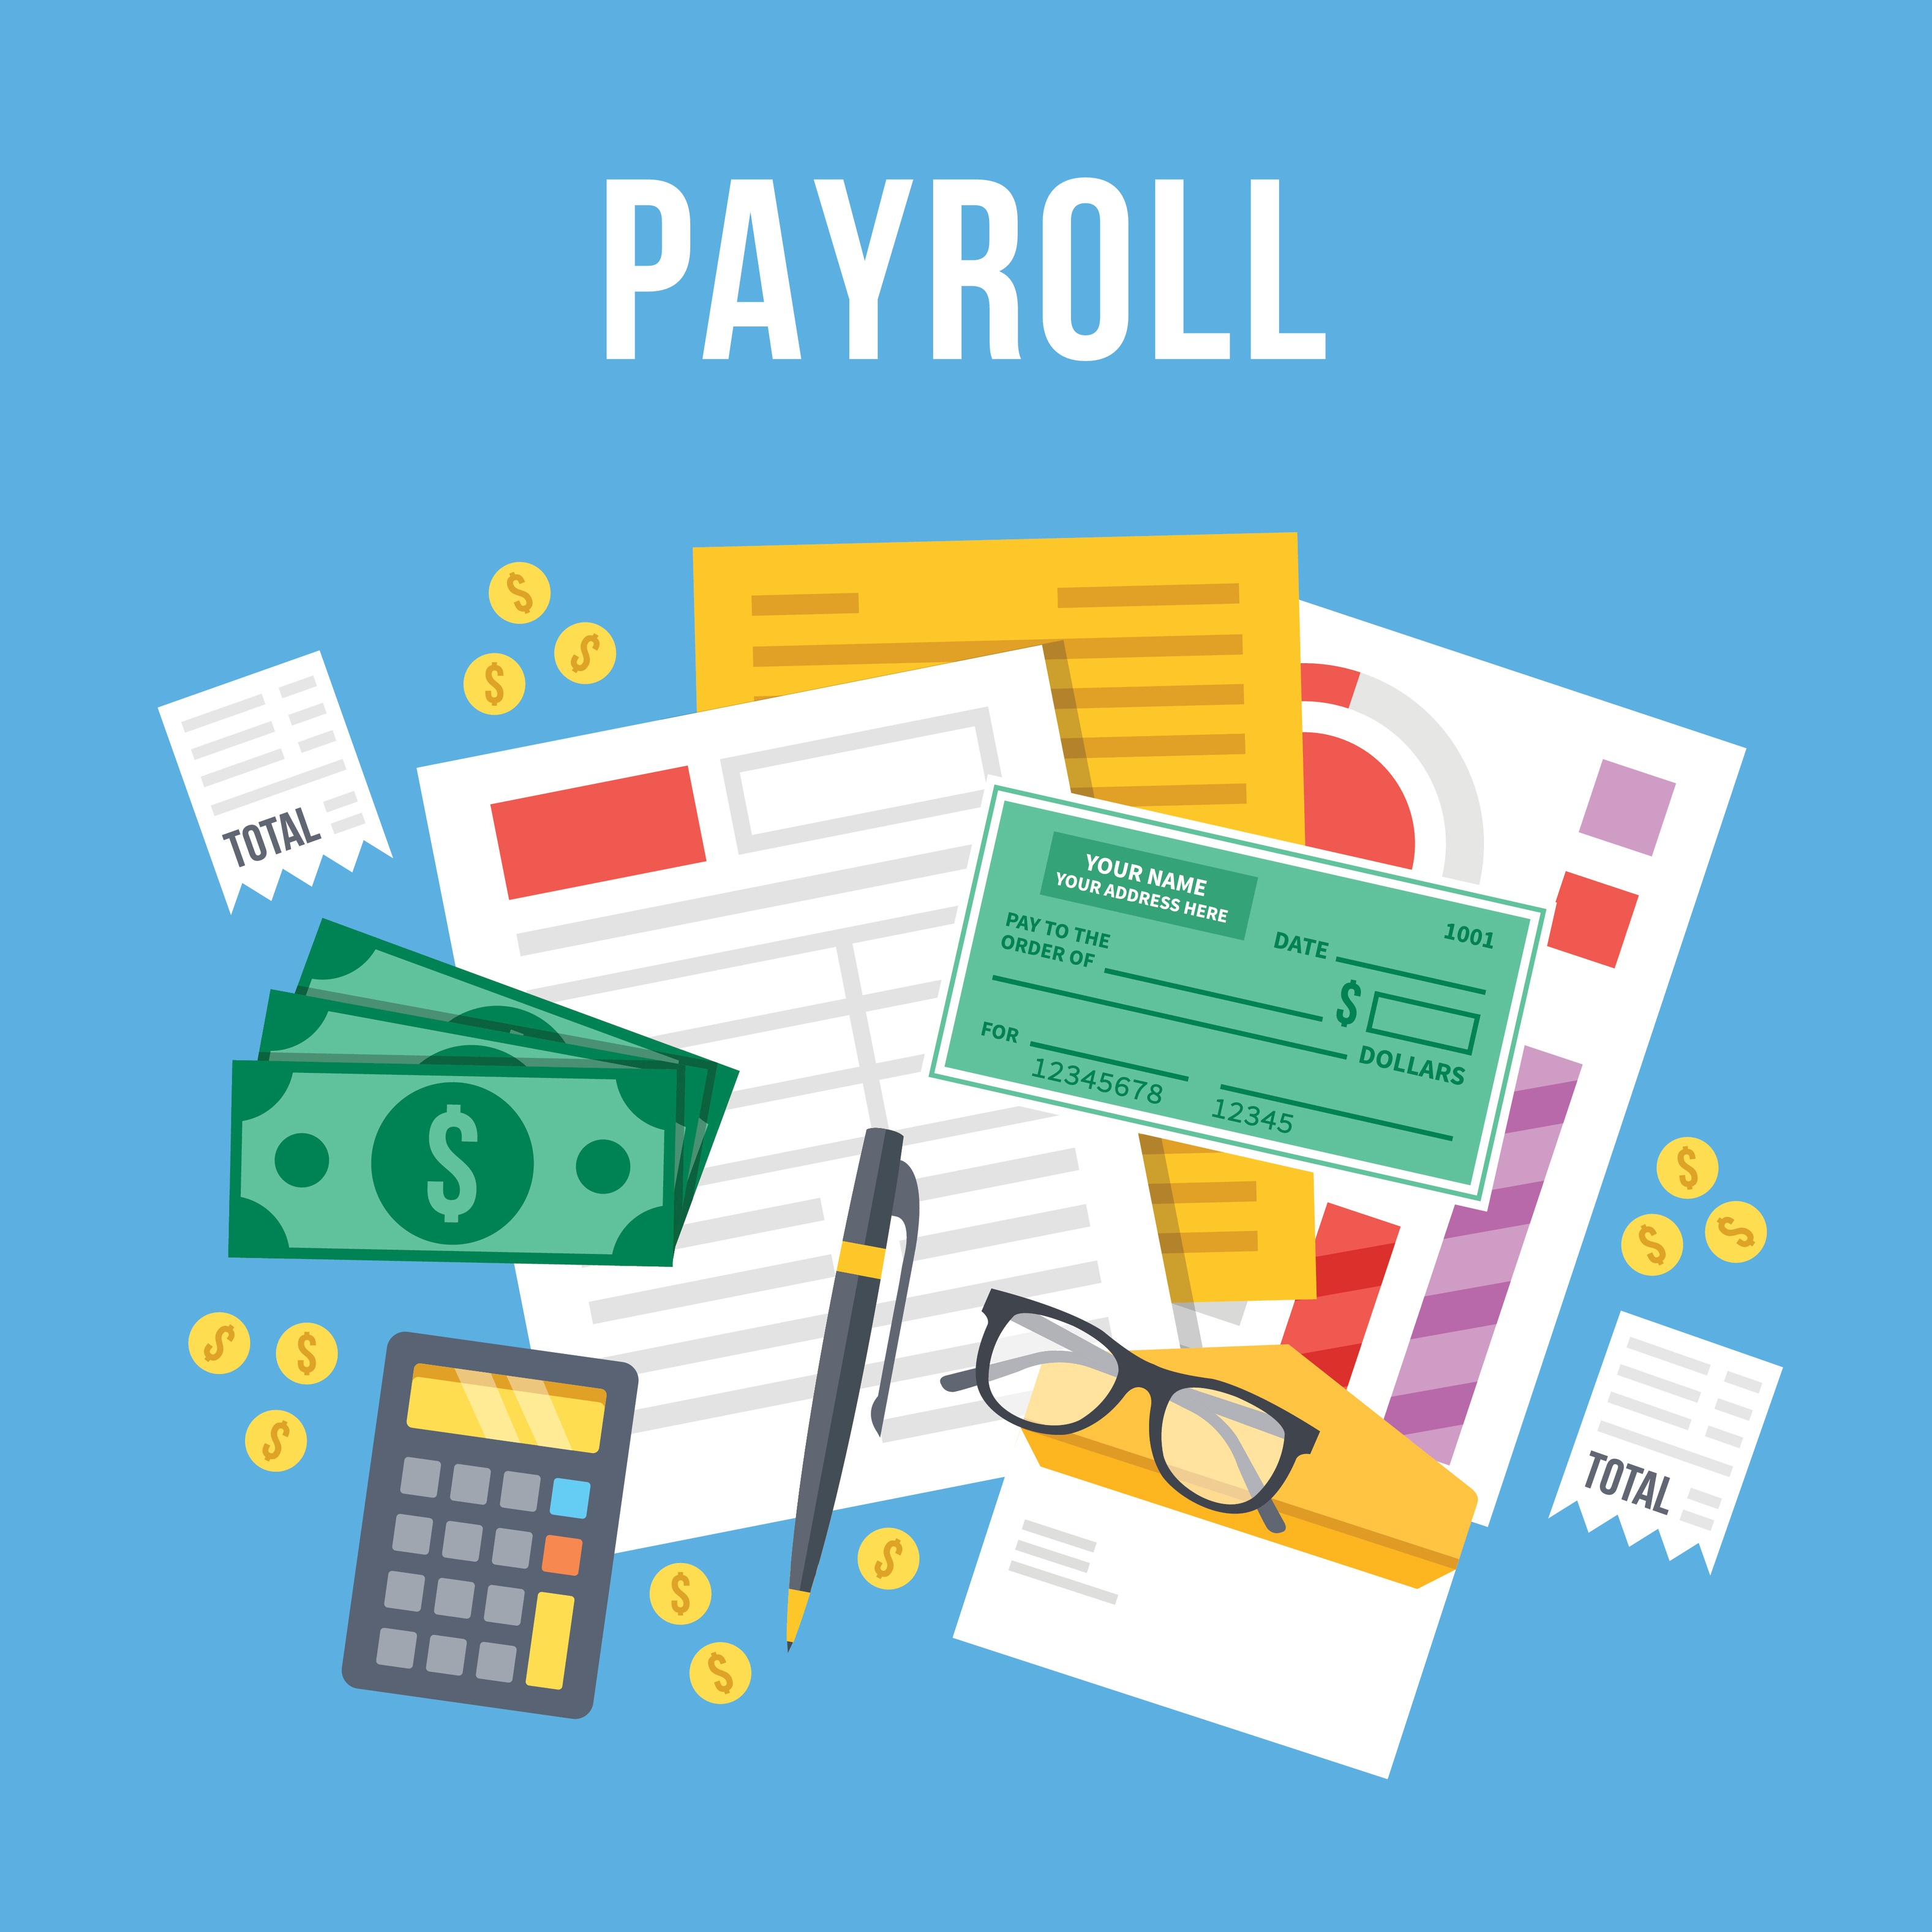 Featured Image for post title: What Makes A Good Business Payroll?